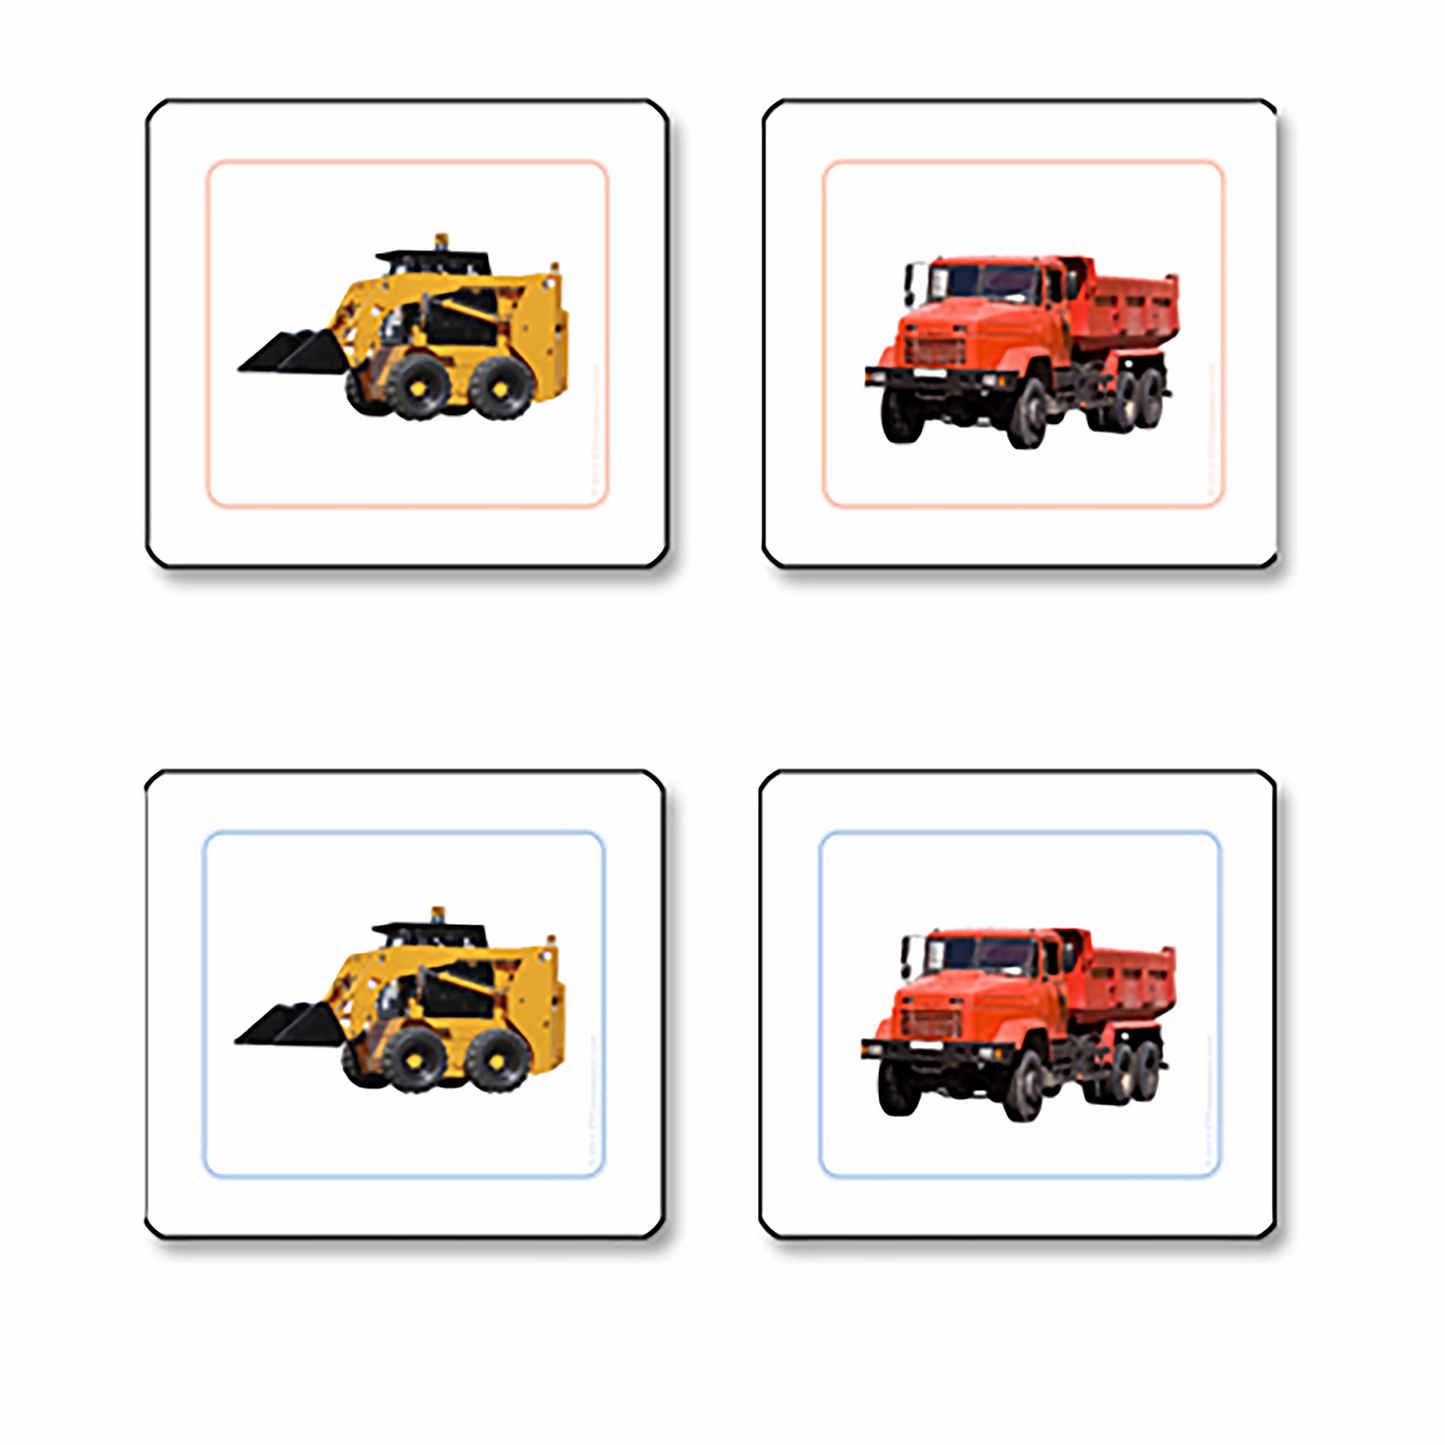 Correspondence Cards for Construction Equipment - Nienhuis AMI